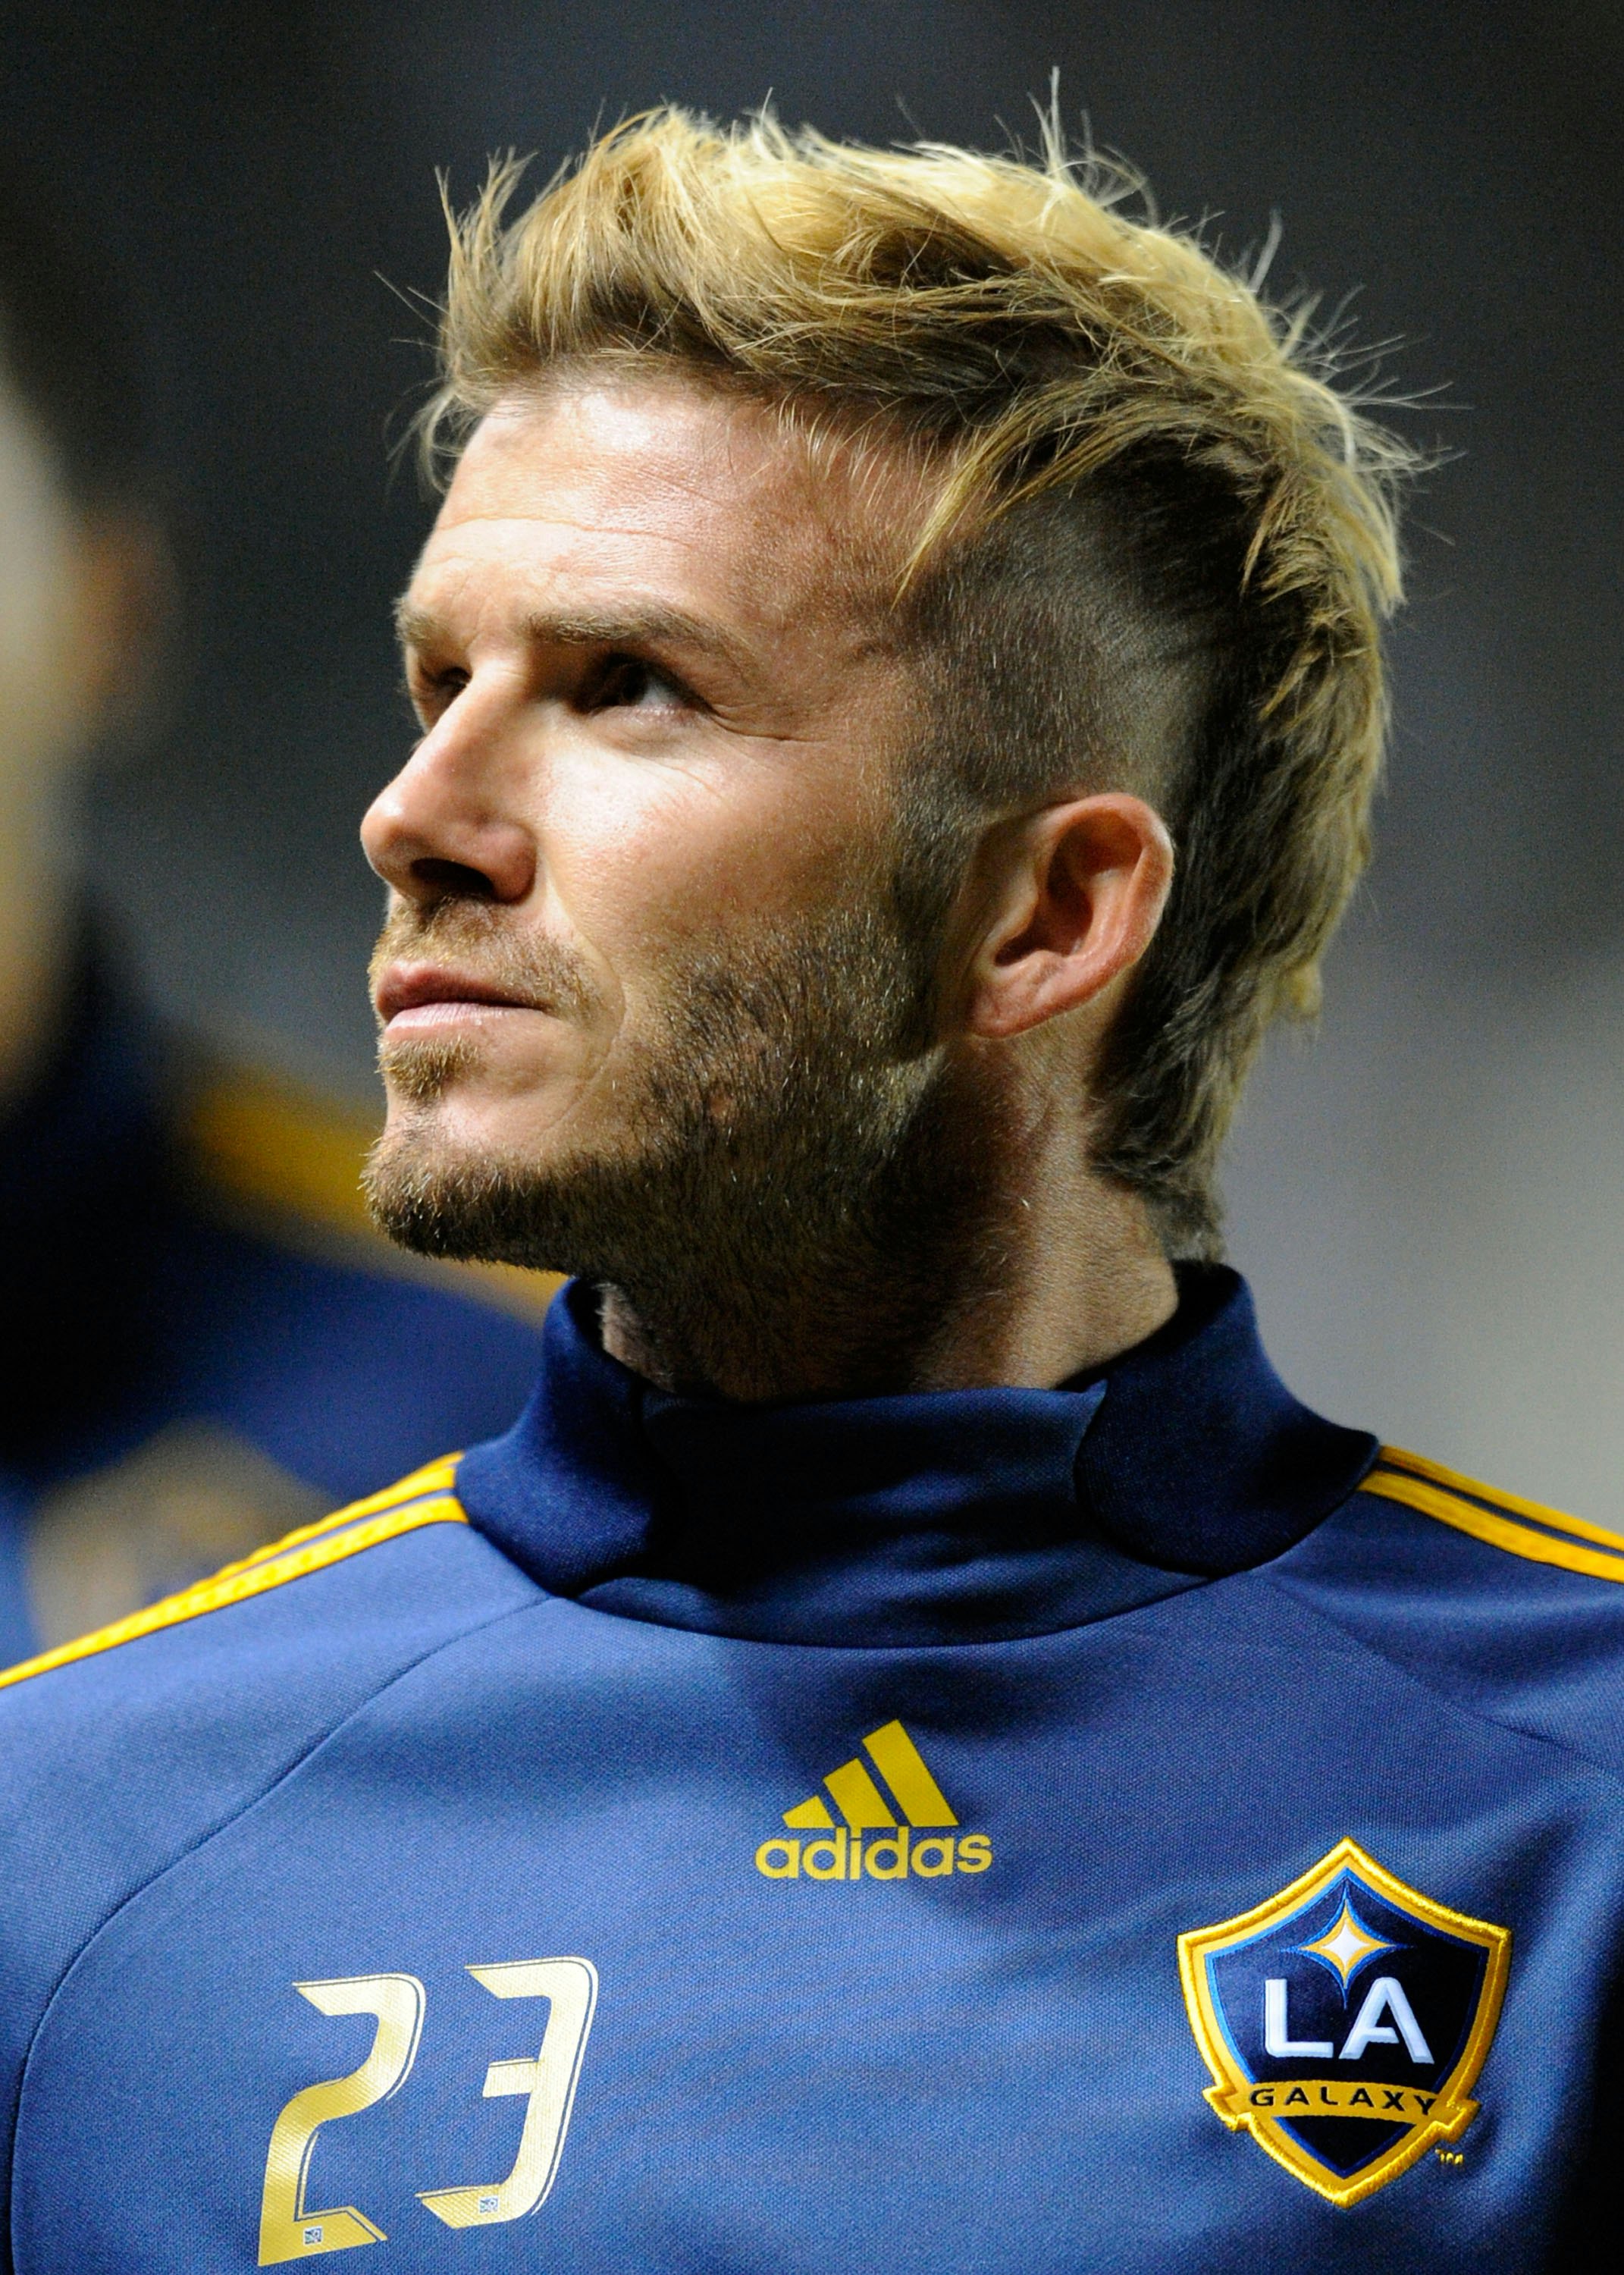 David Beckham Is Sexiest Man Alive It Likely Has To Do With His